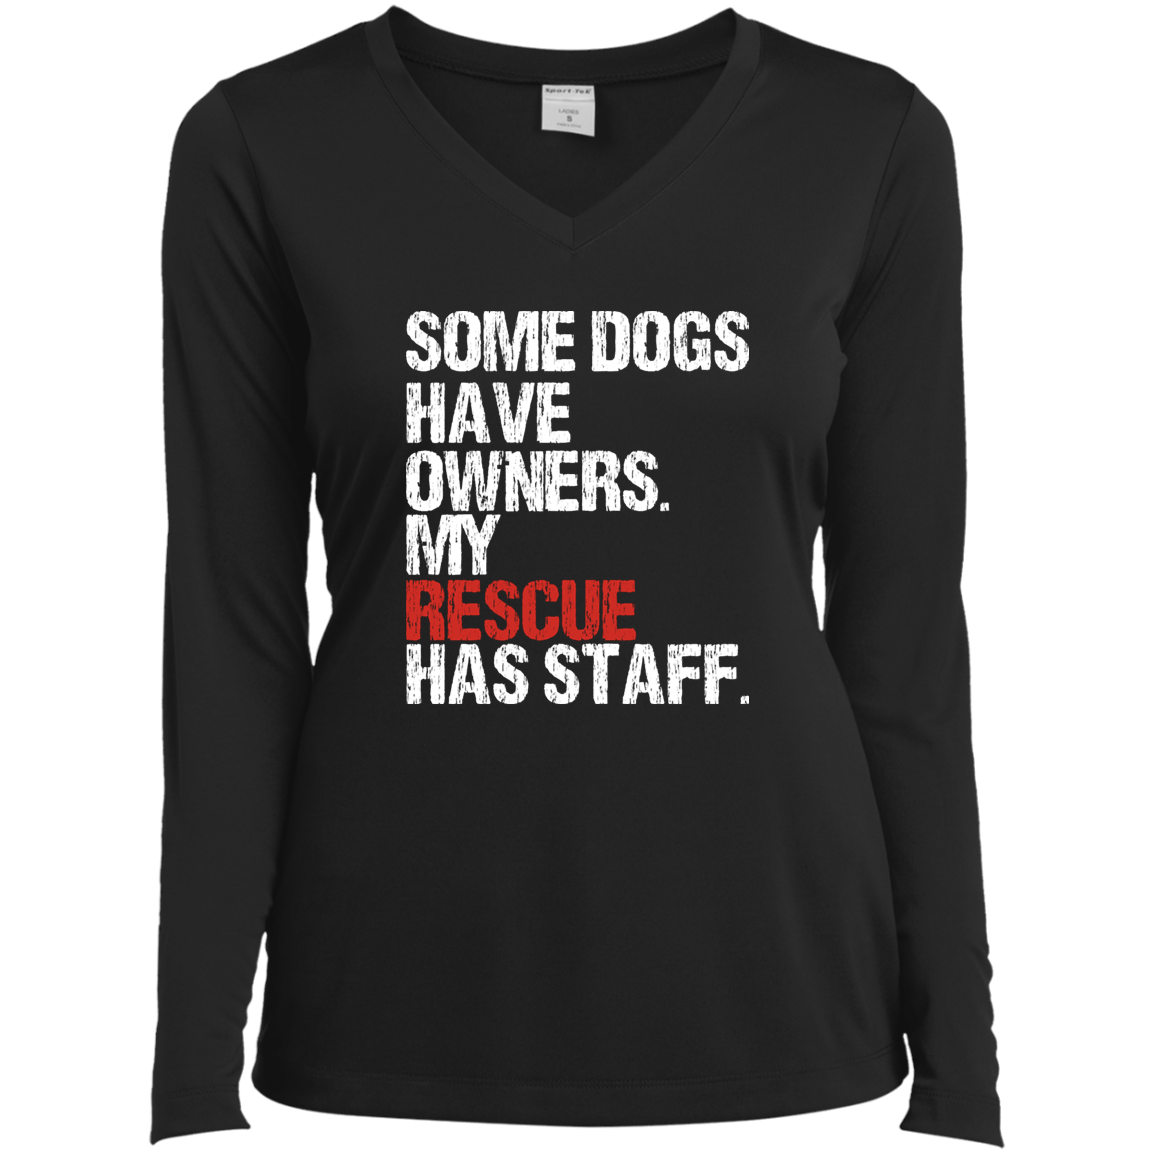 Some Dogs Have Owners - Long Sleeve Ladies V Neck.